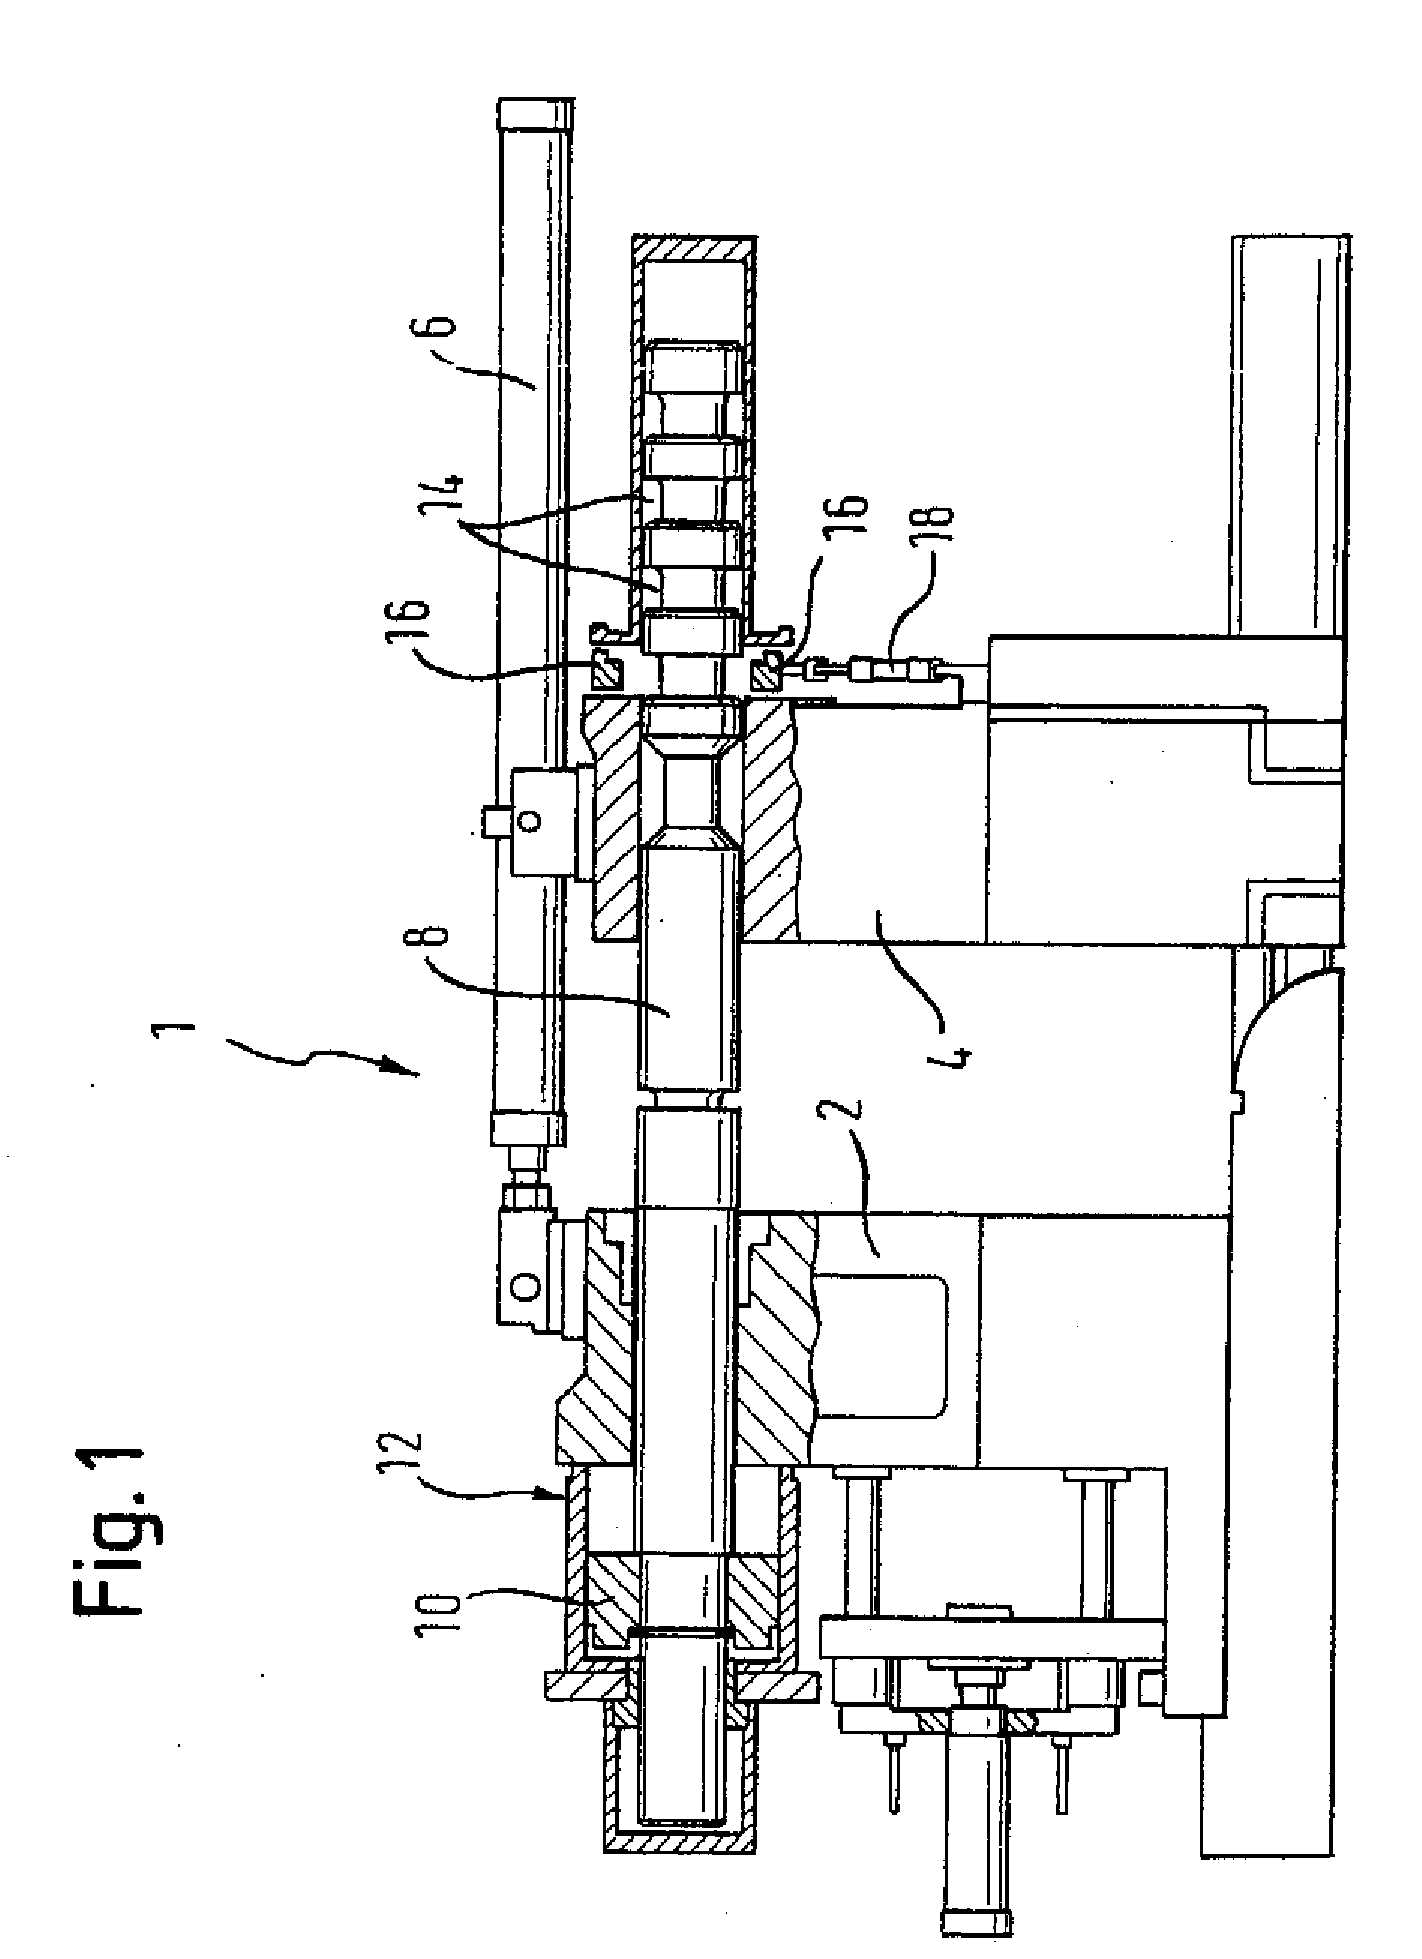 Method of compression molding thermoplastic material